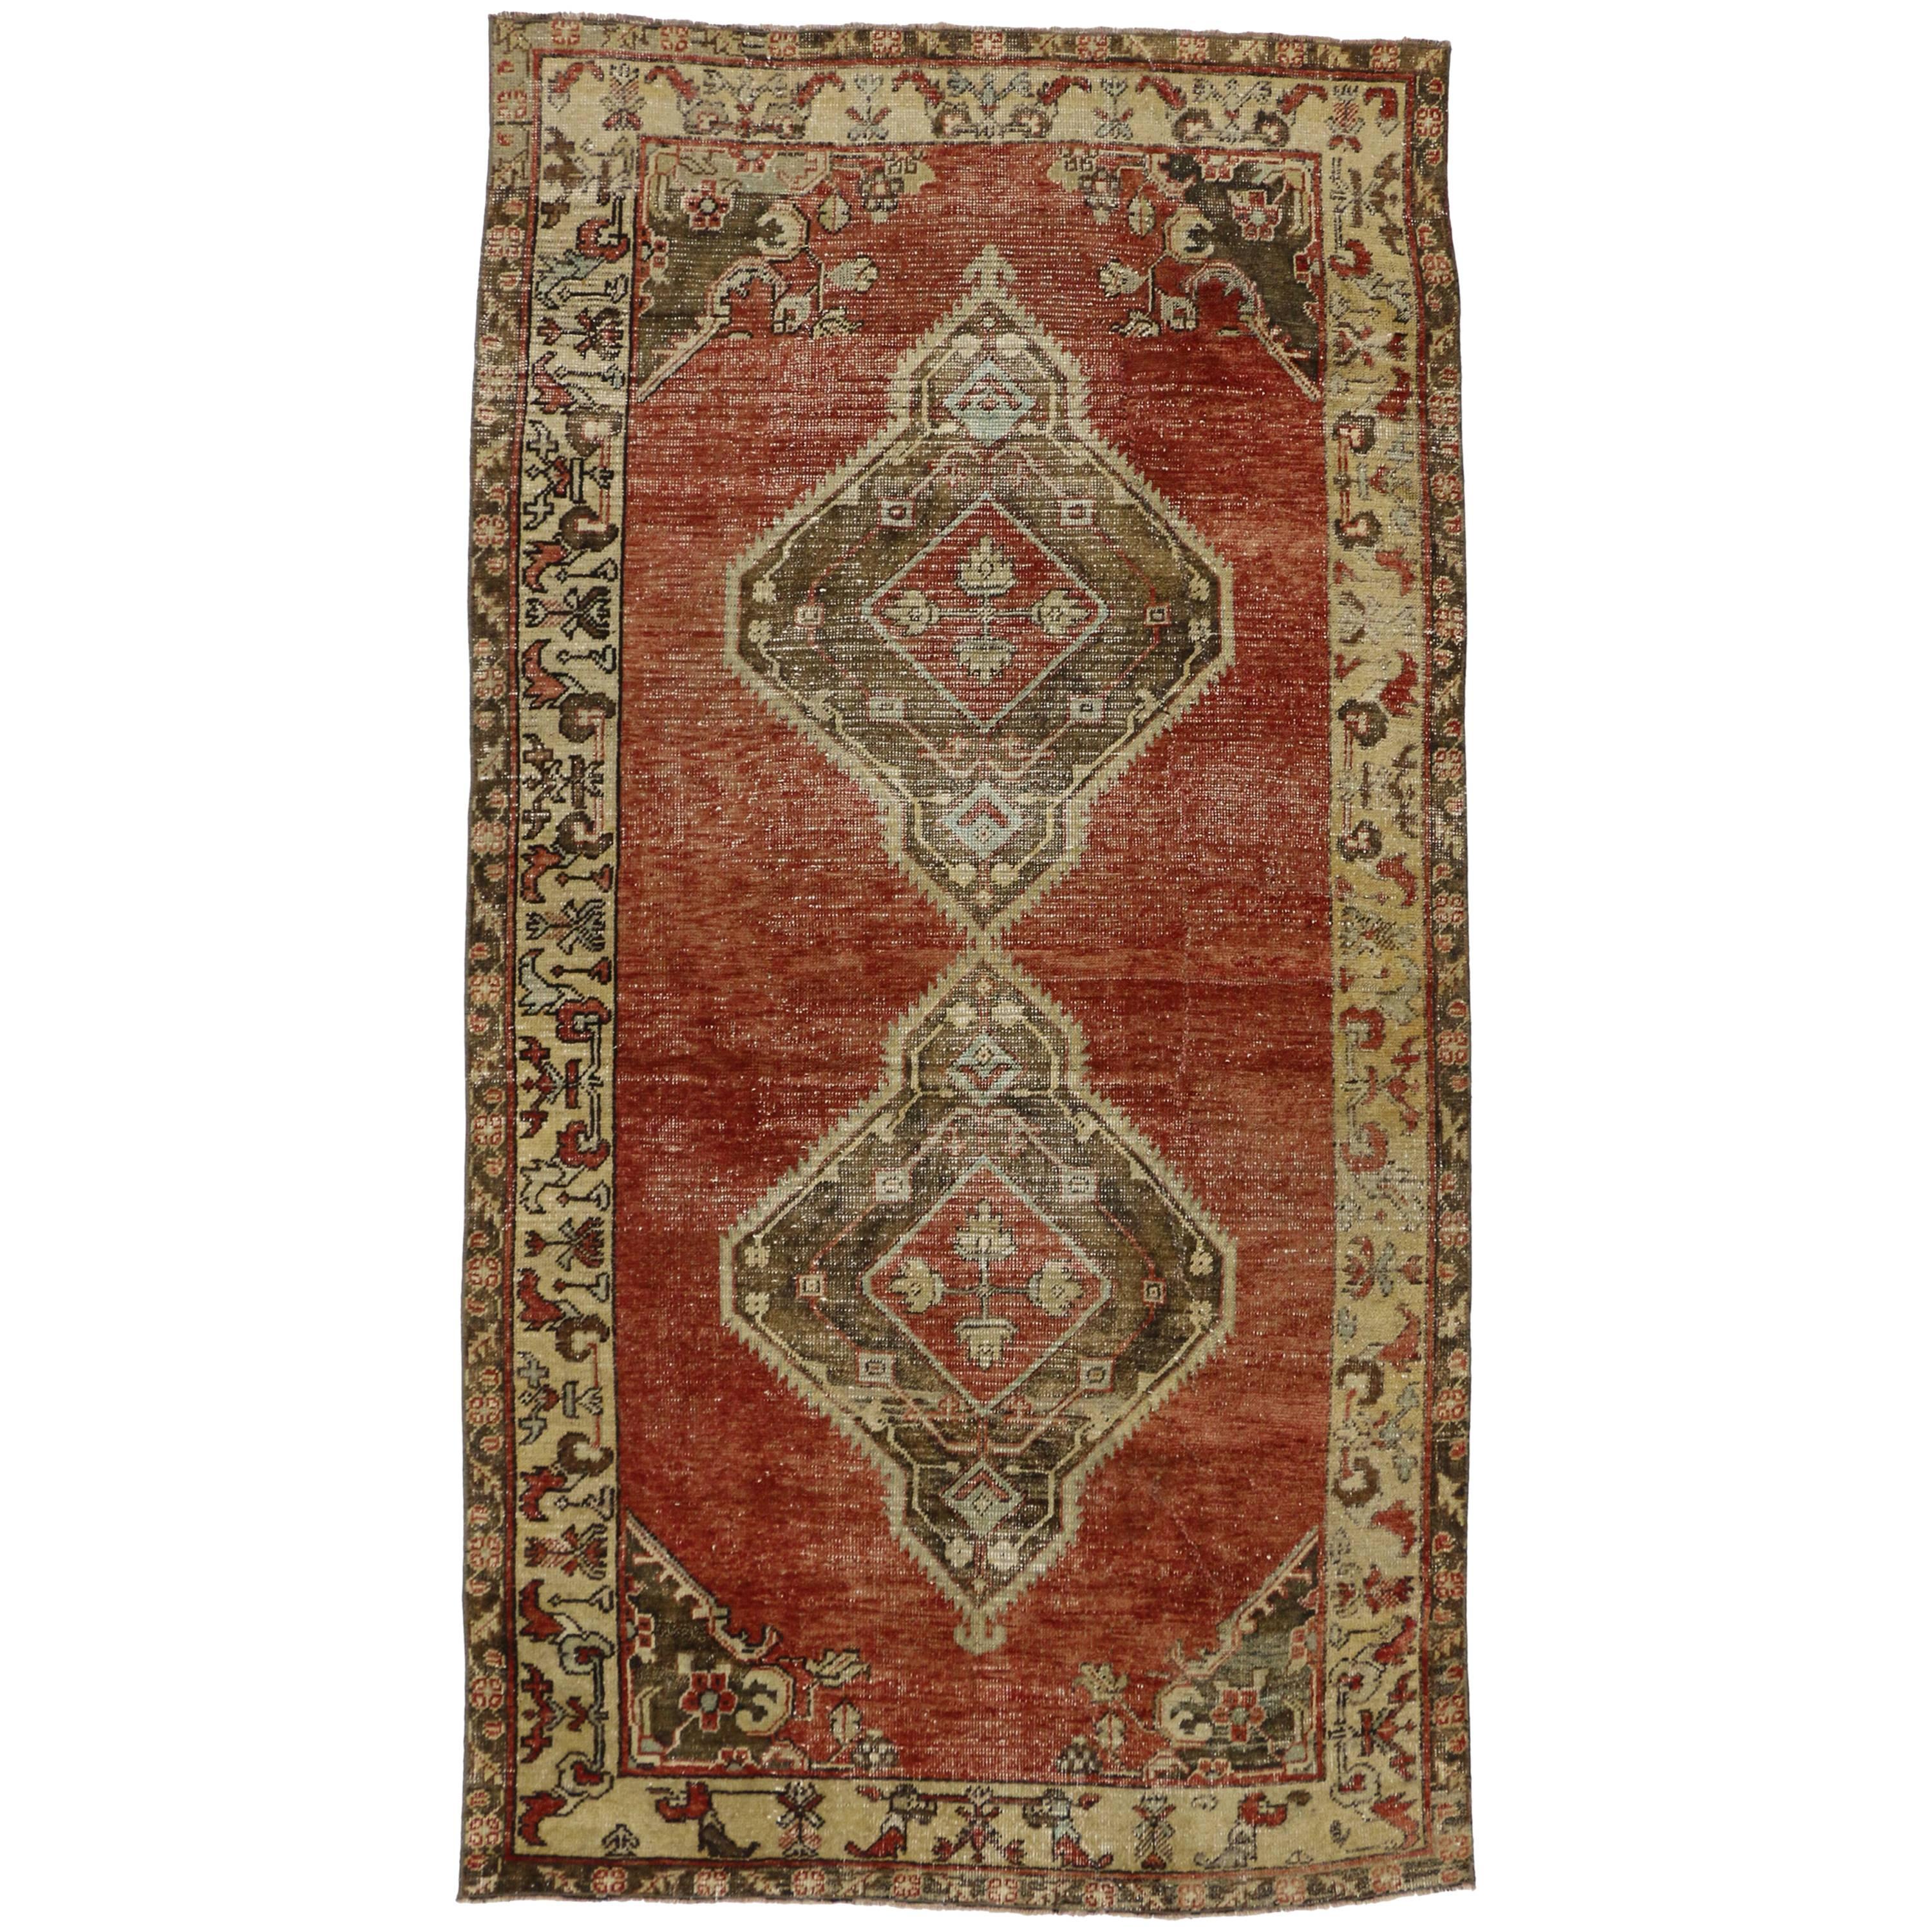 Vintage Turkish Oushak Rug with Rustic Modern Style